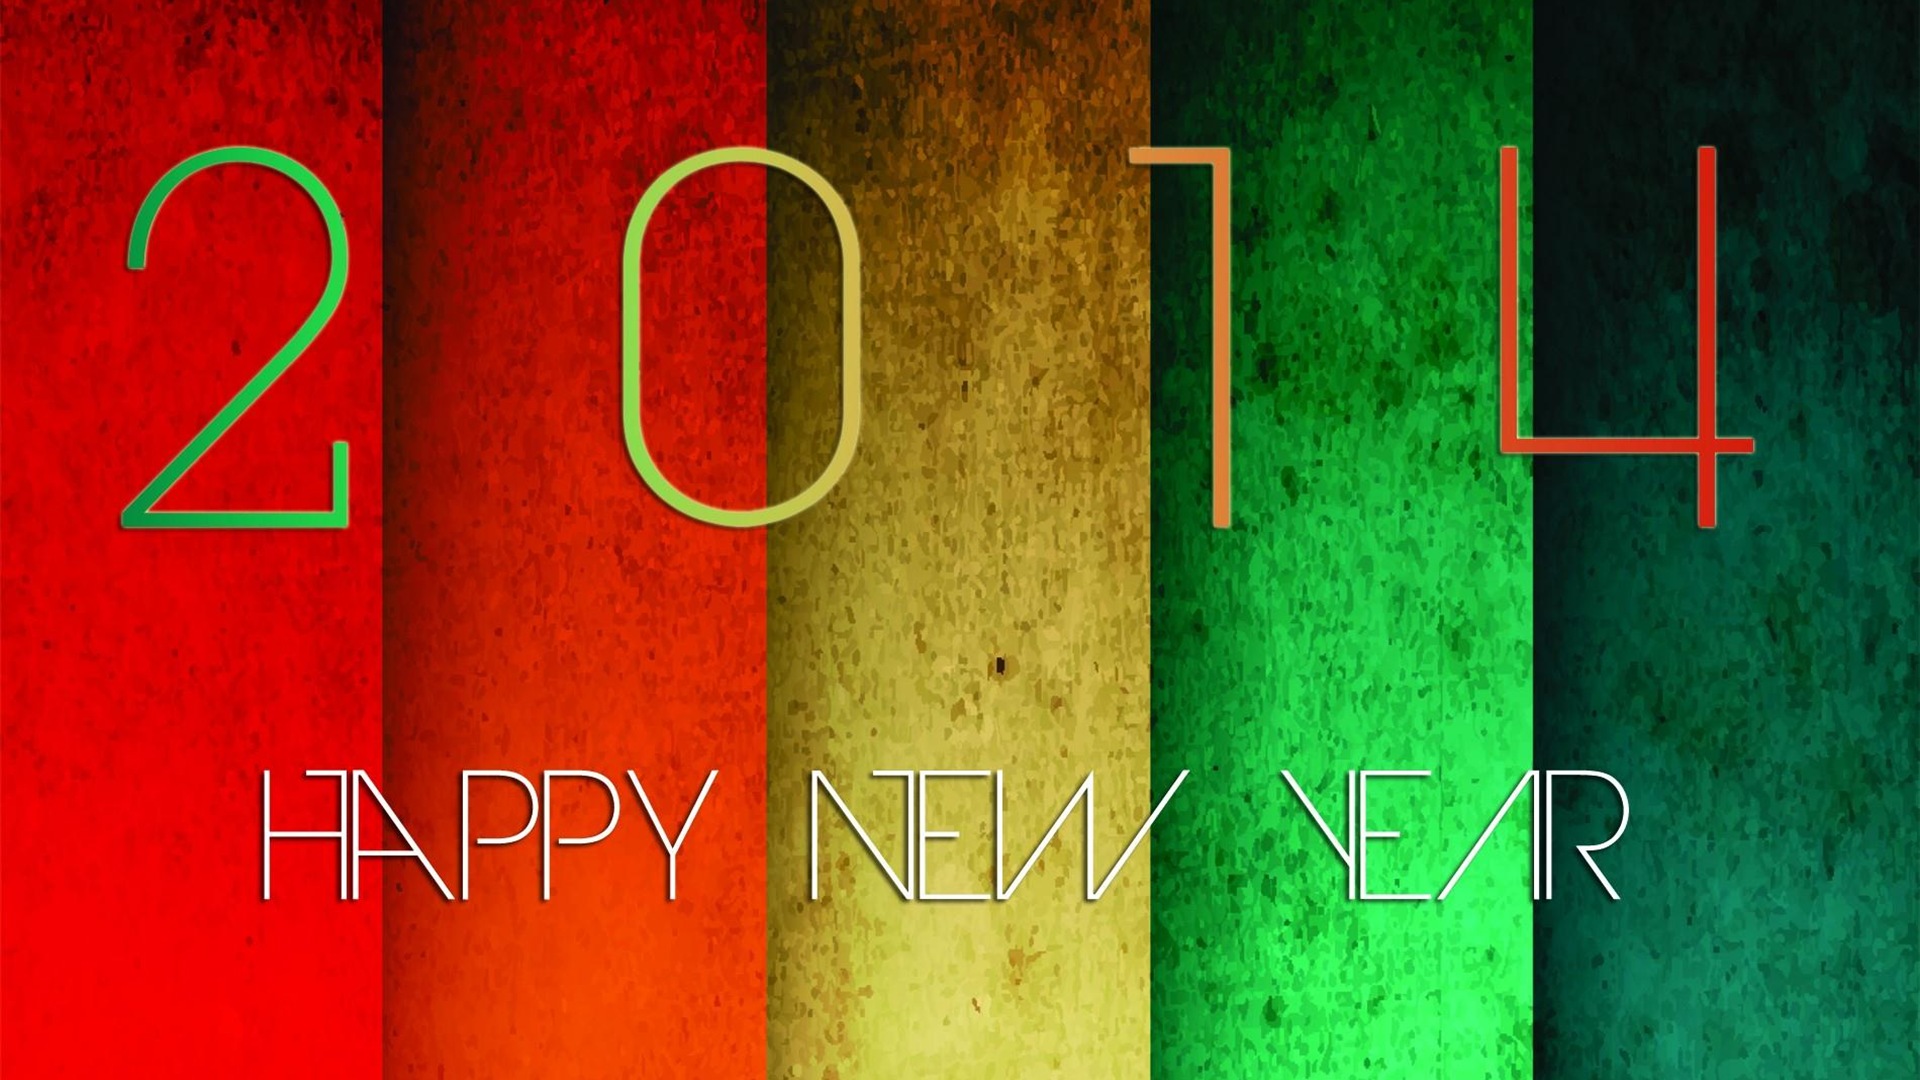 2014 New Year Theme HD Wallpapers (2) #3 - 1920x1080